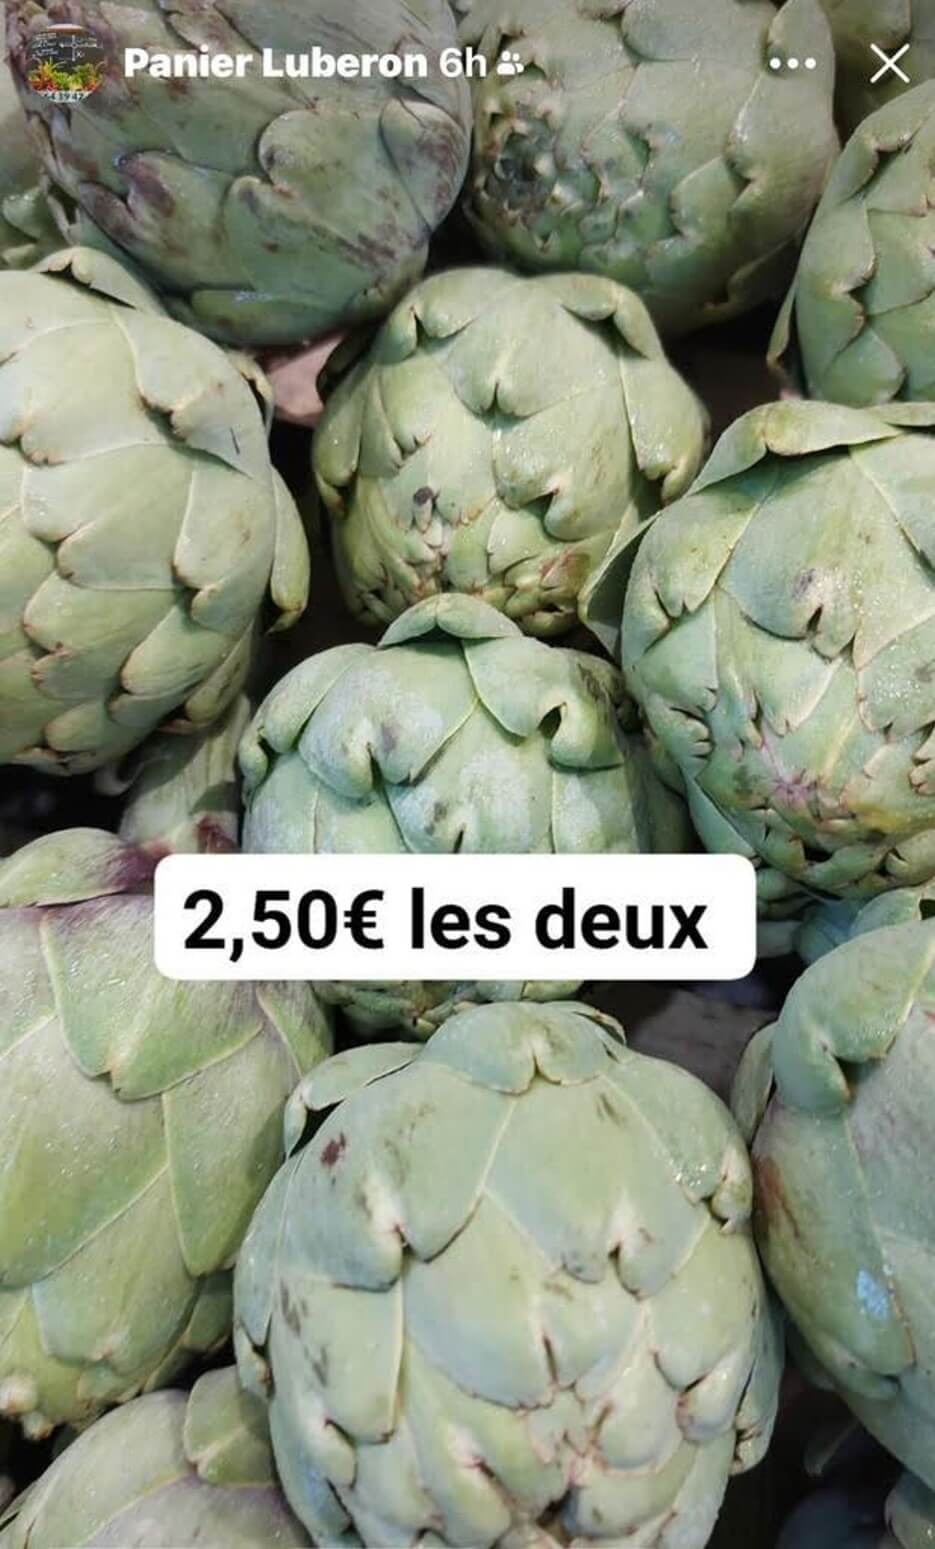 Adrian Leeds scores a great price for artichokes at a market in Nice, France